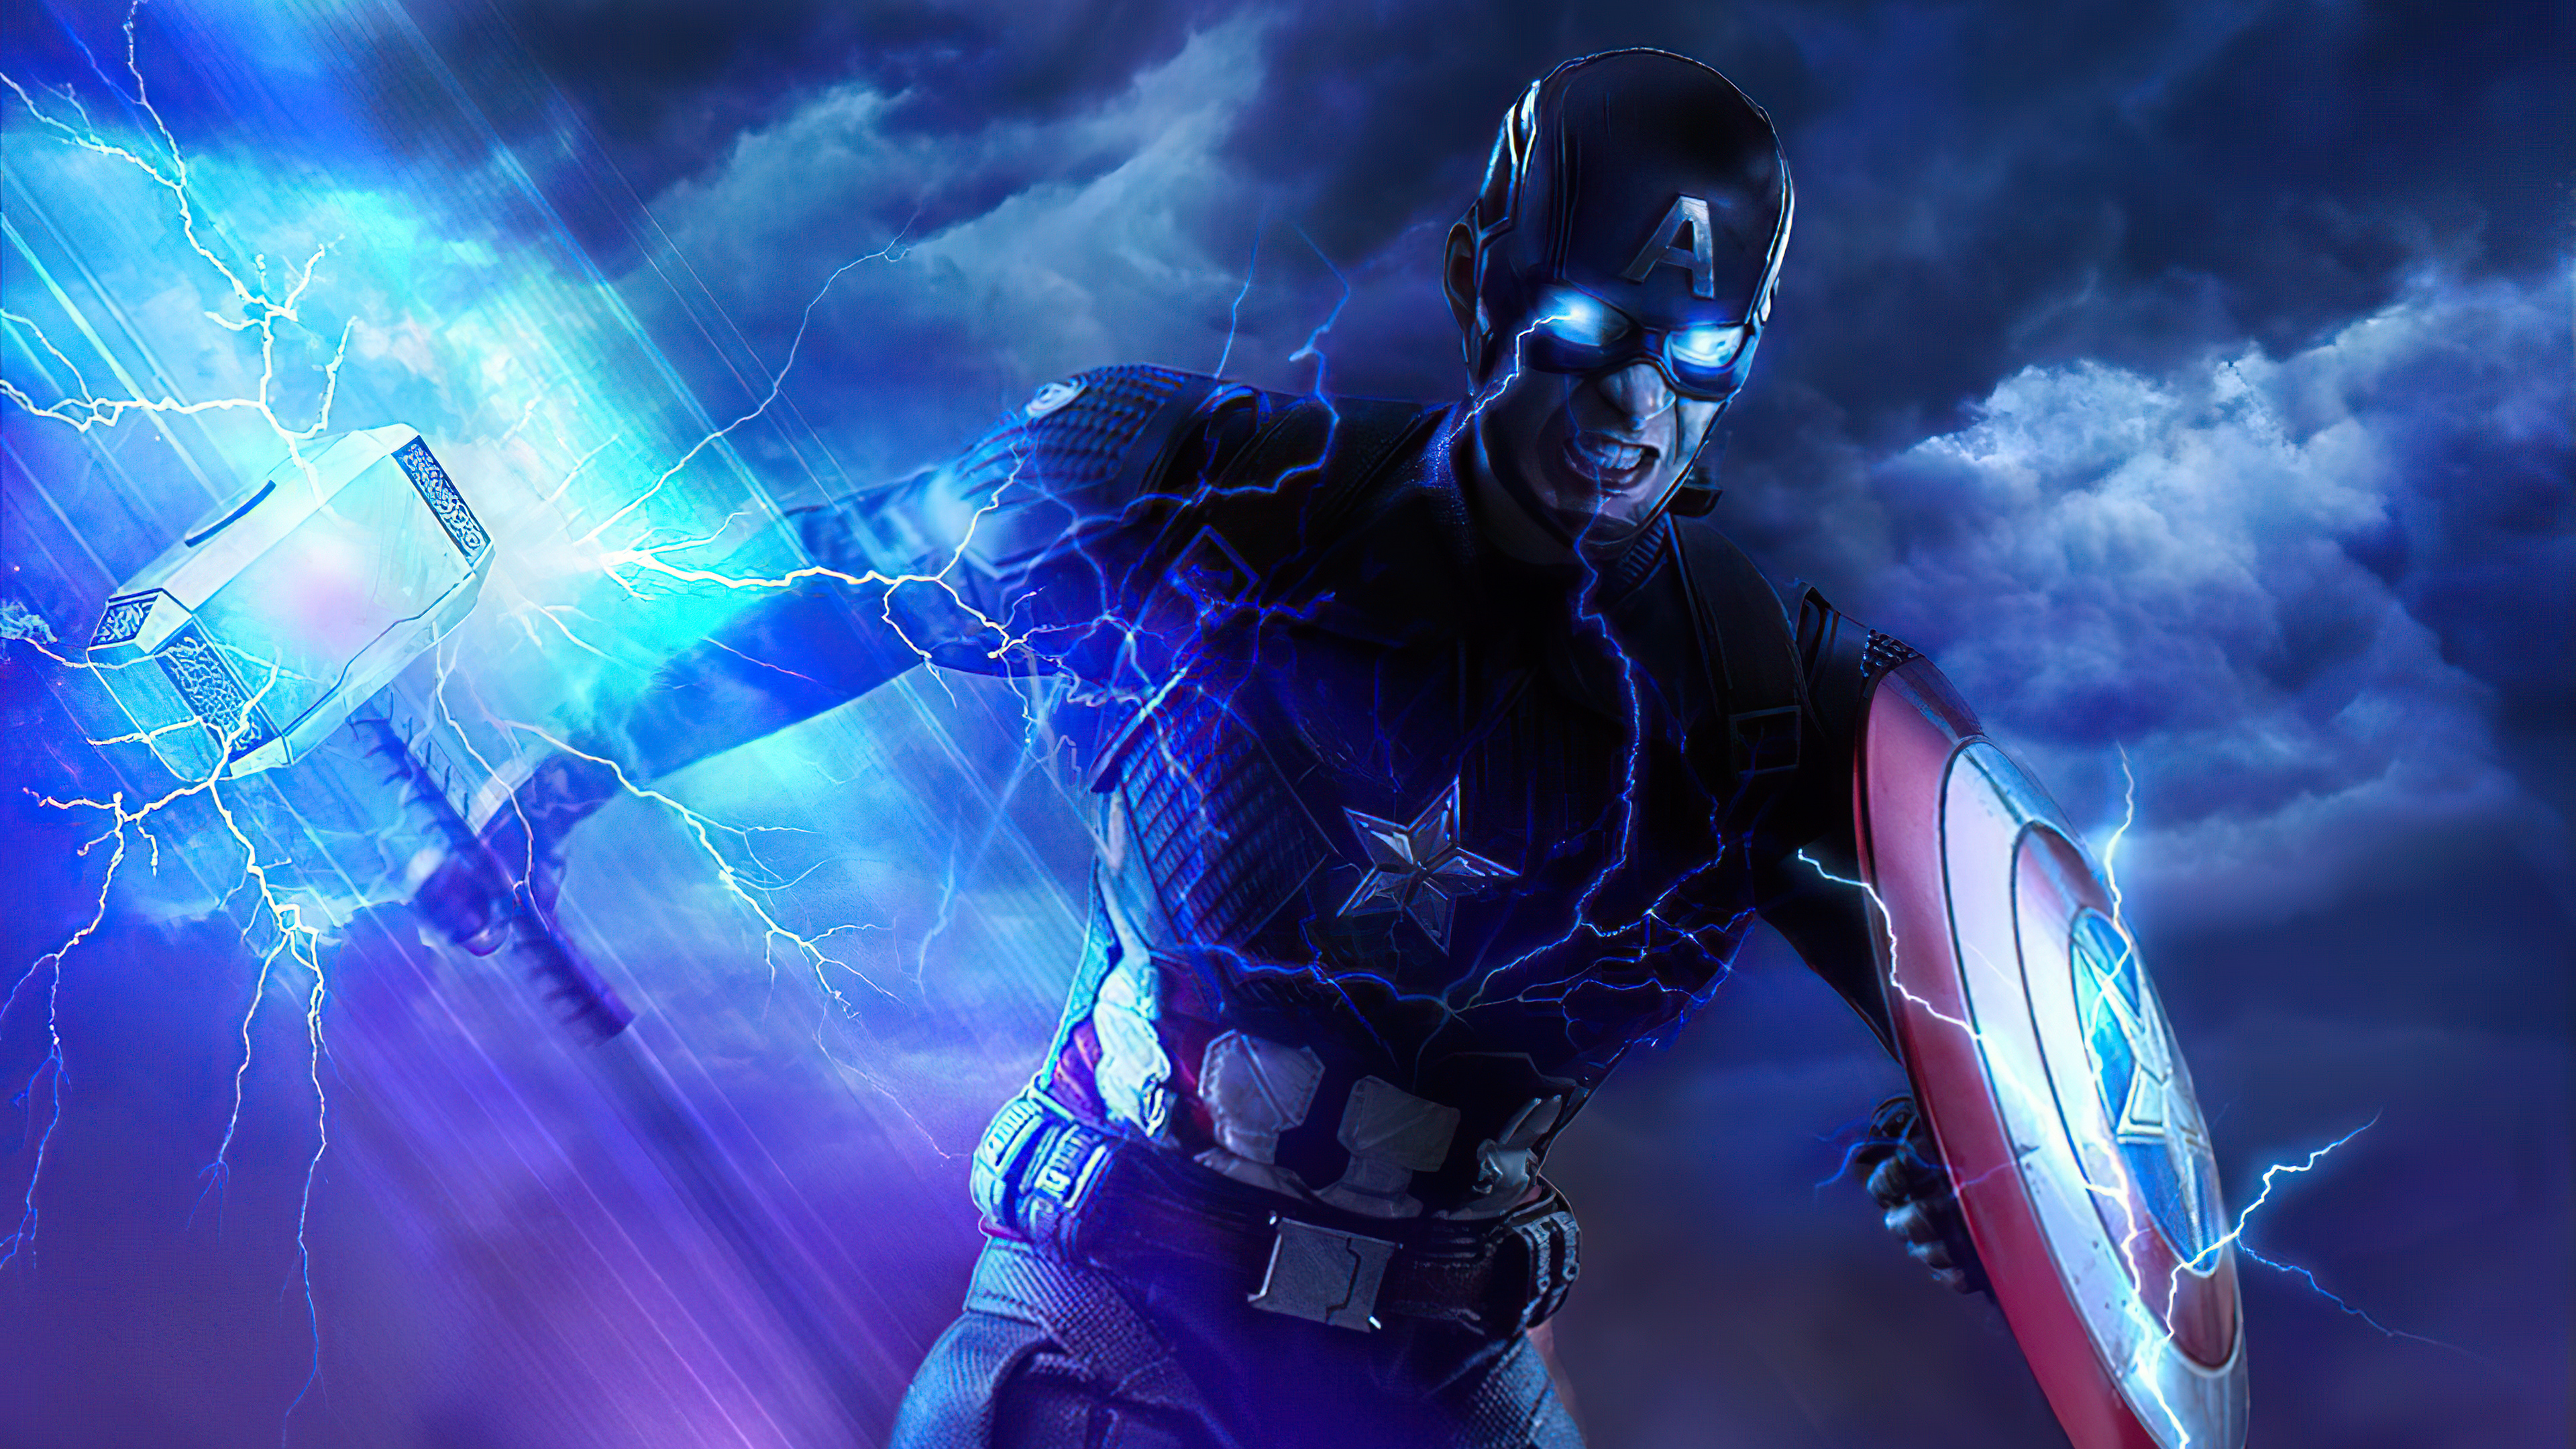 Captain America with hammer and shield Wallpaper 4k Ultra HD